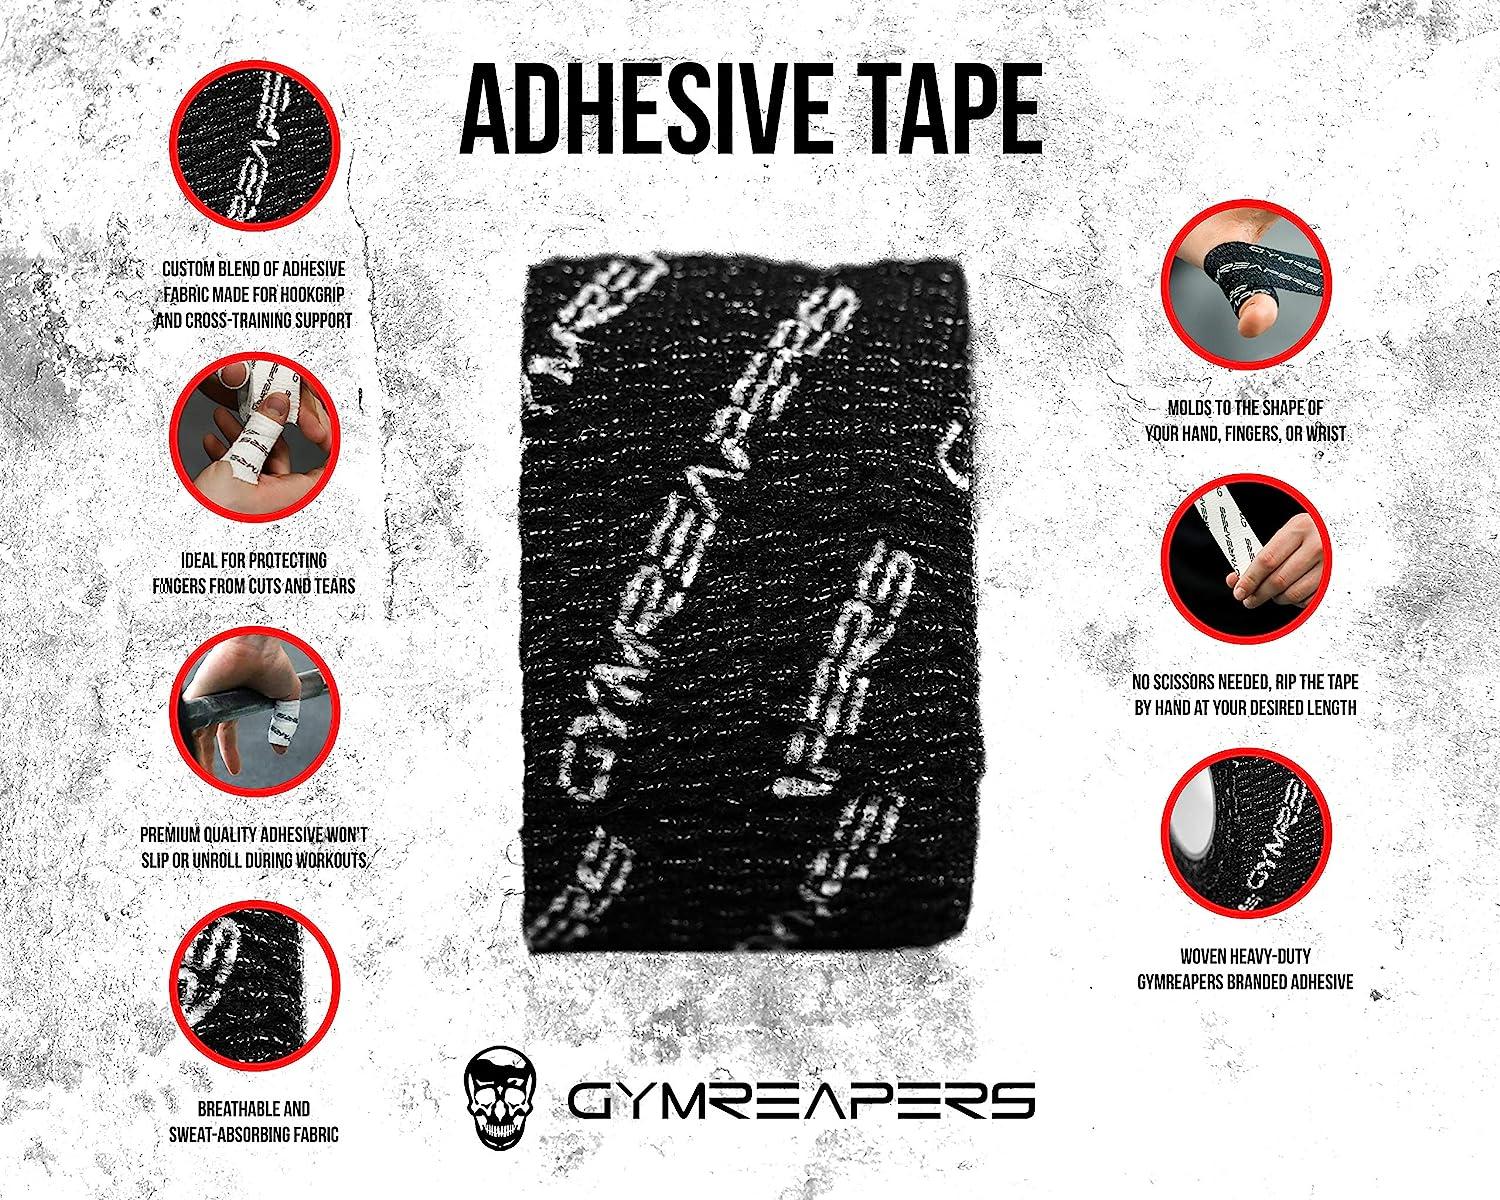 Weightlifting Hook Grip Tape w/Premium Adhesive for Olympic Weight Lift,  Cross Training & Lifting, Stretch Fit Athletic Finger Wrap, Protects Thumb,  tape crossfit